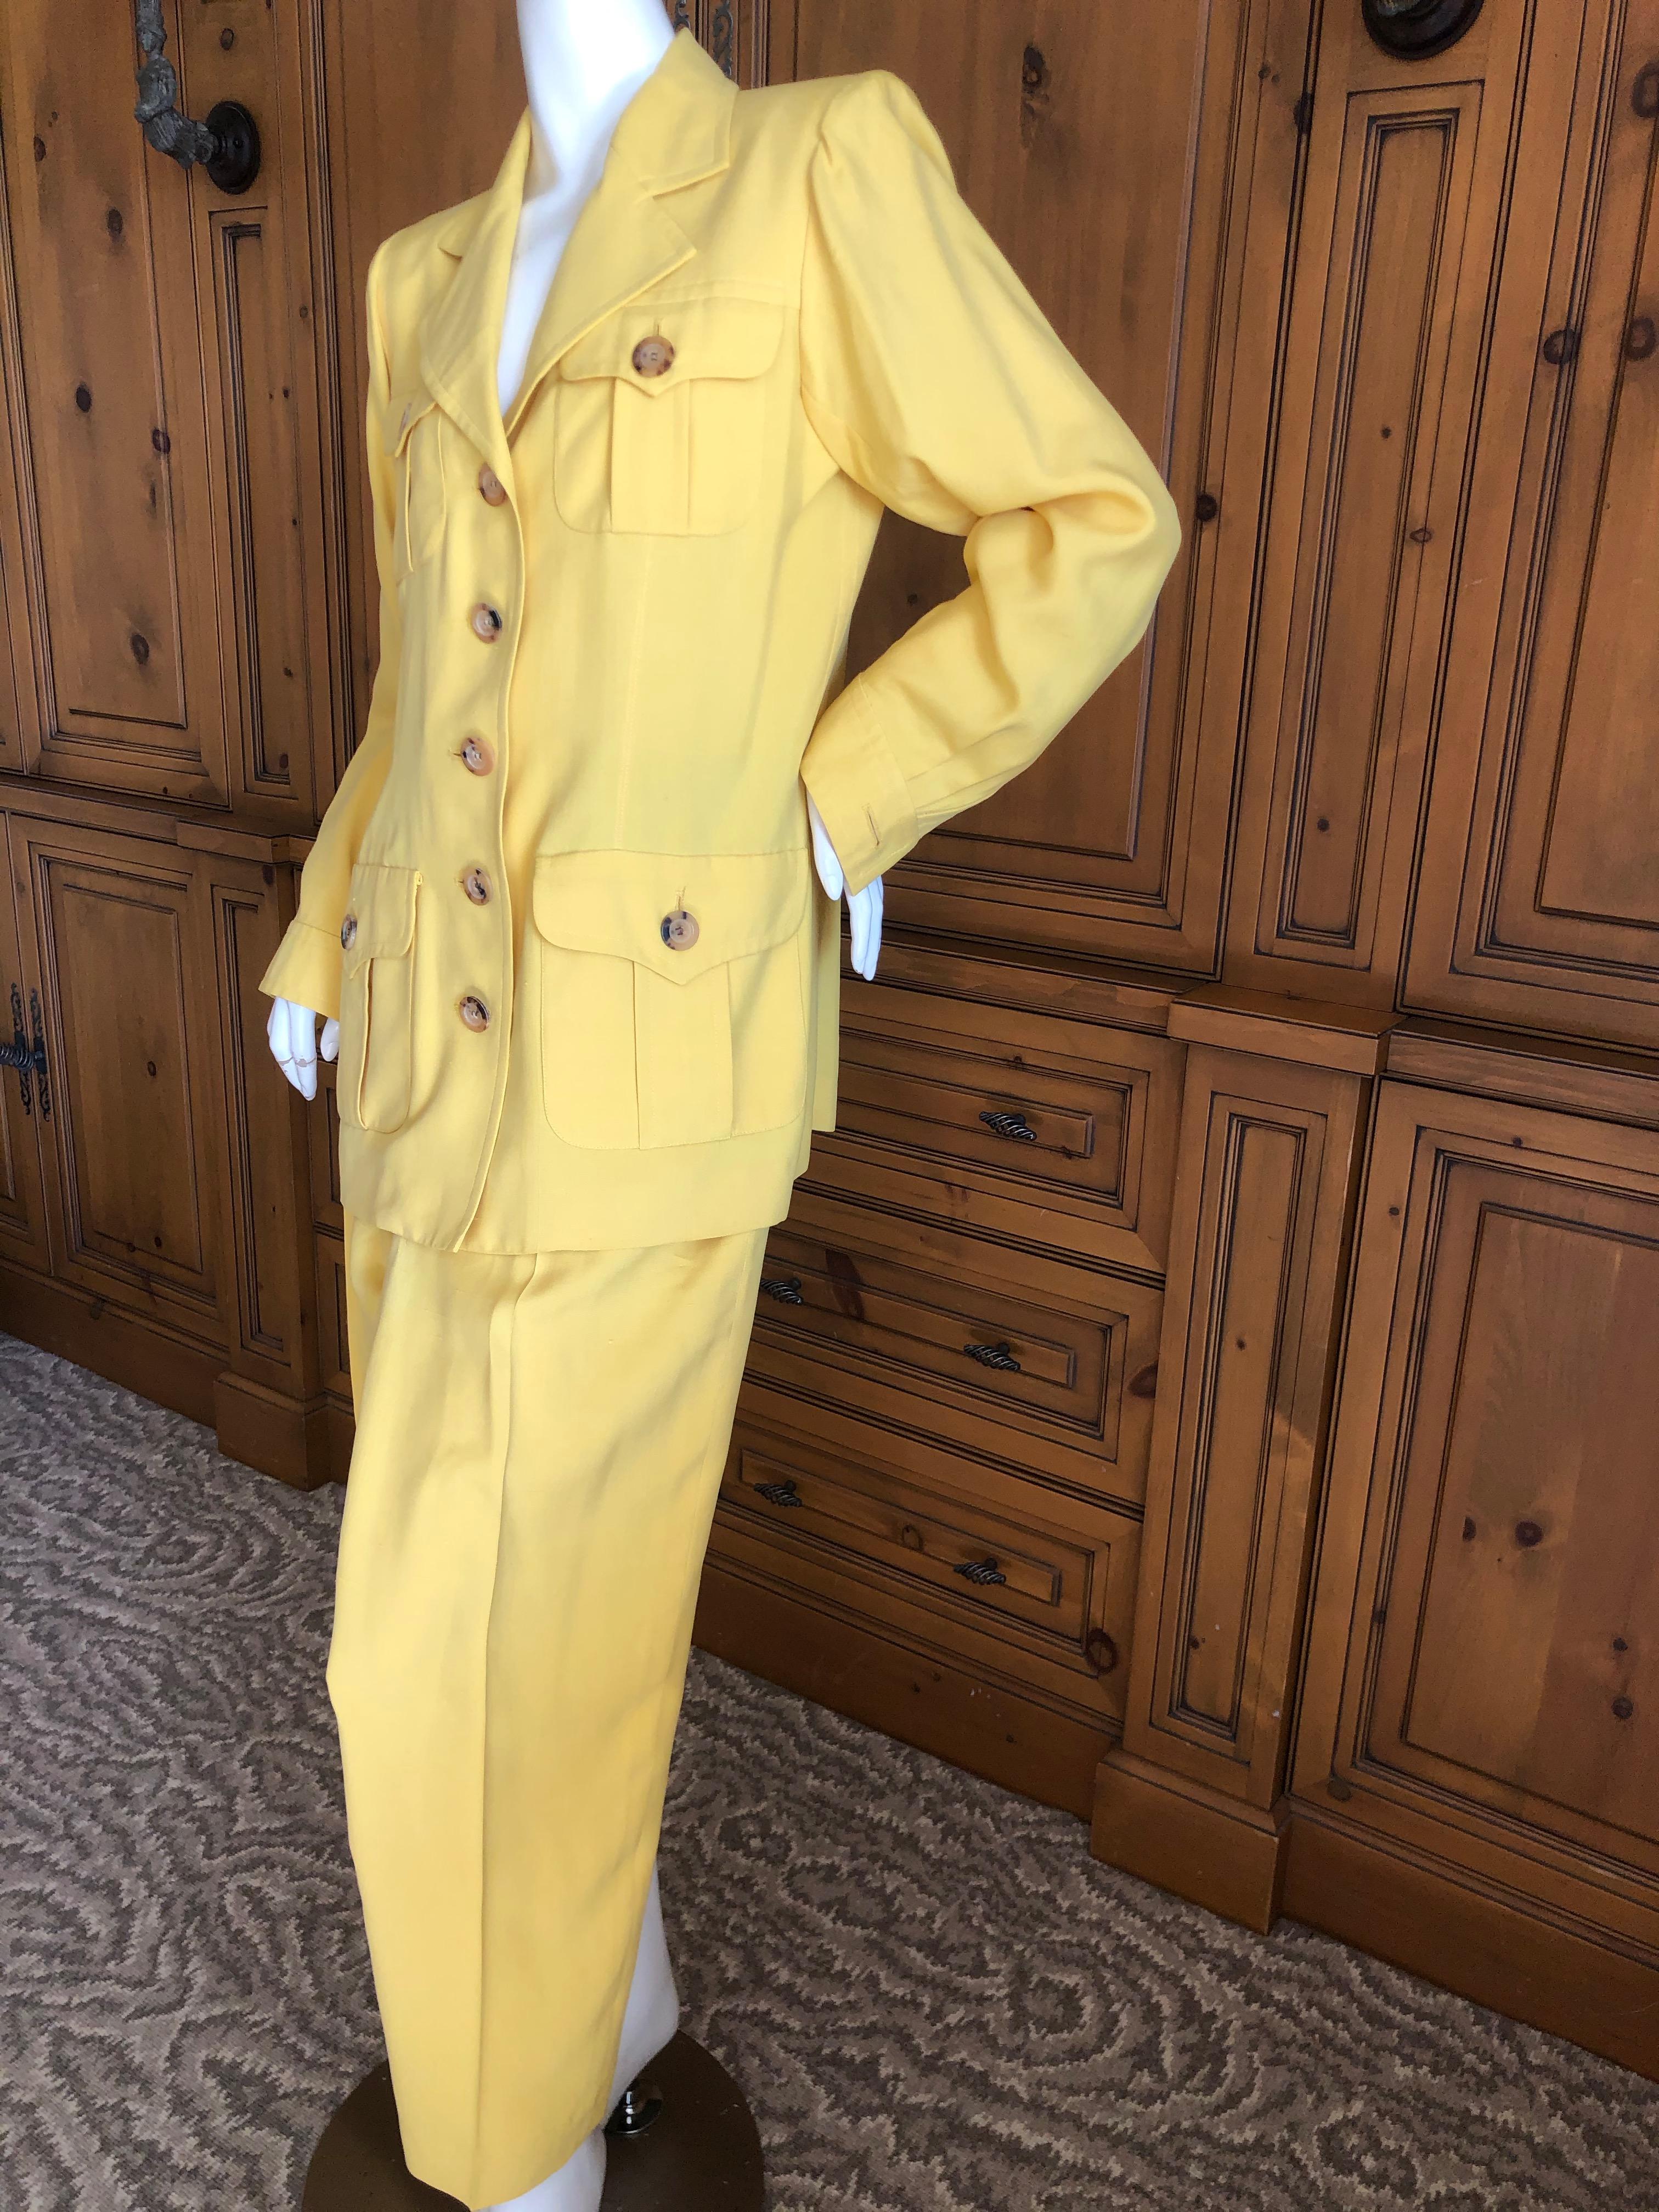 Yves Saint Laurent Vintage 1980's Yellow Dupioni Silk Safari Suit In Excellent Condition For Sale In Cloverdale, CA